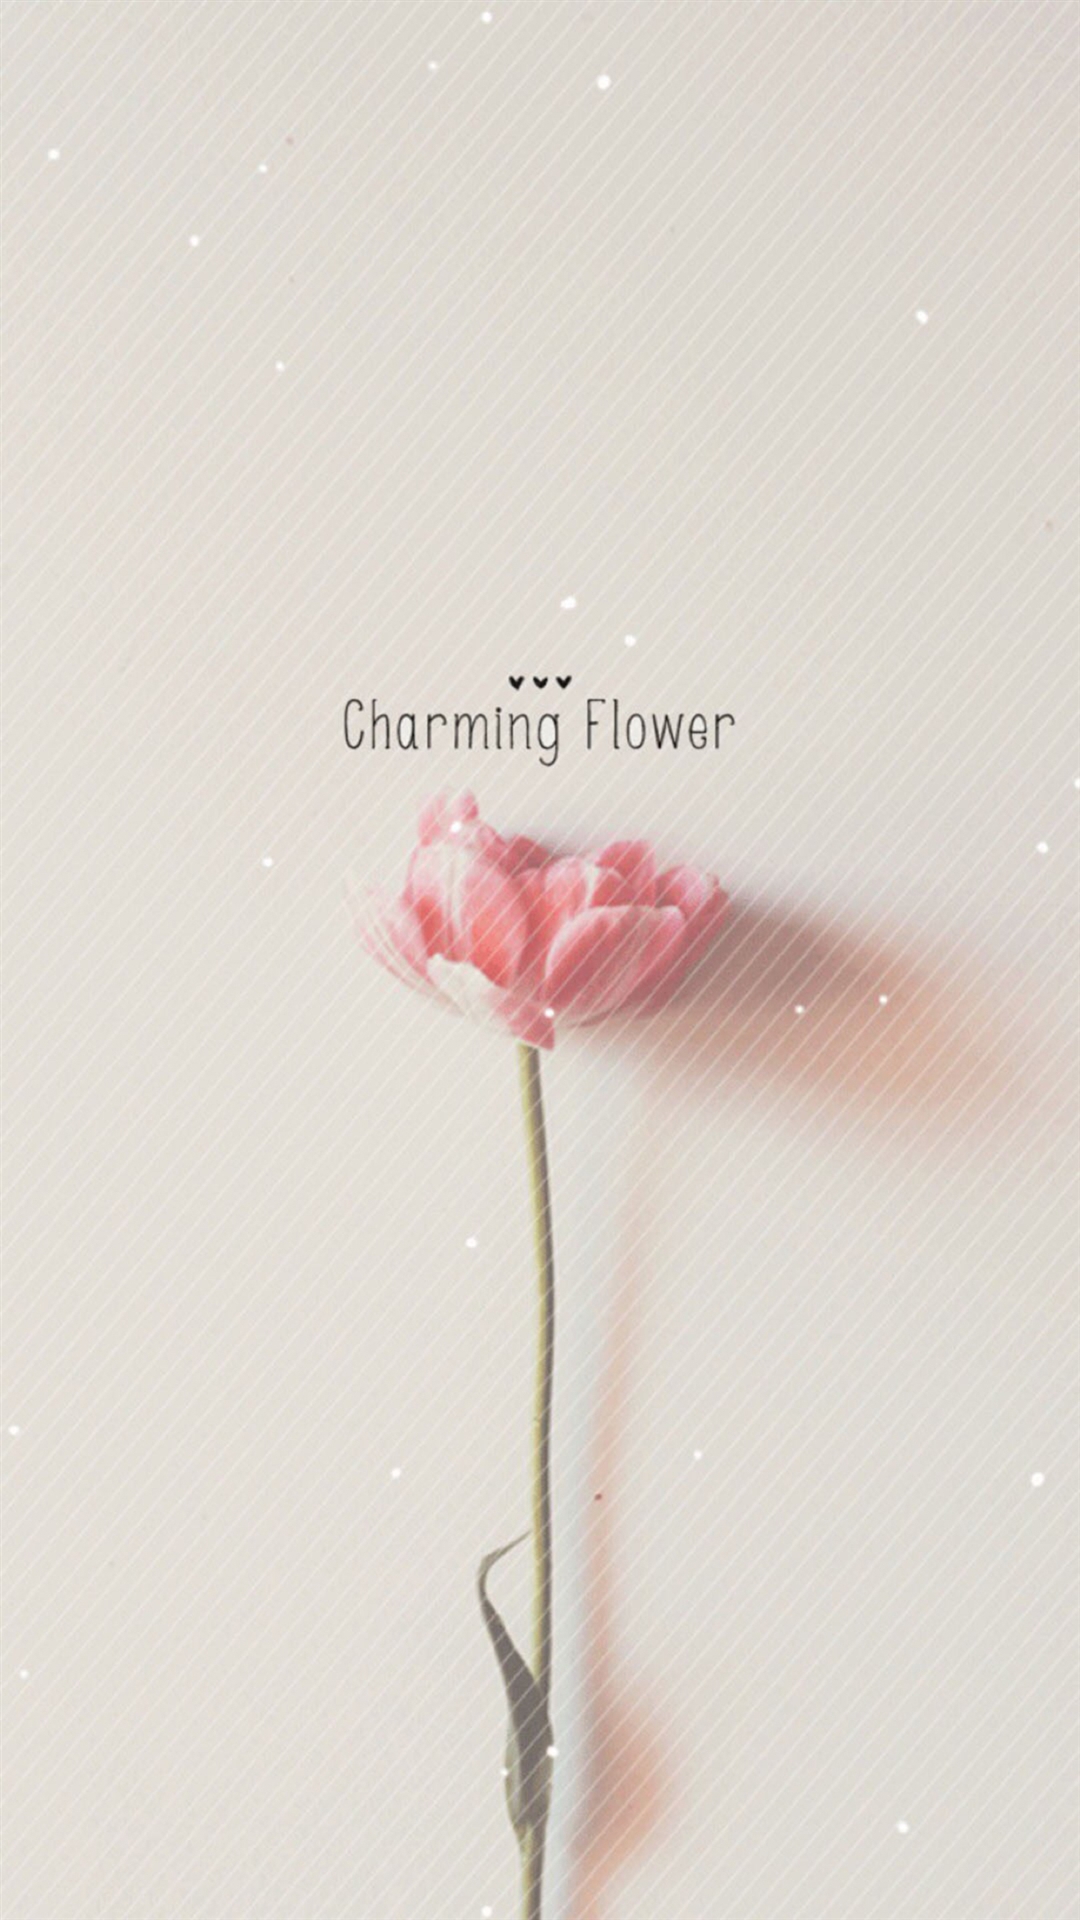 Pure Charming Flower Simple Pattern iPhone Wallpaper